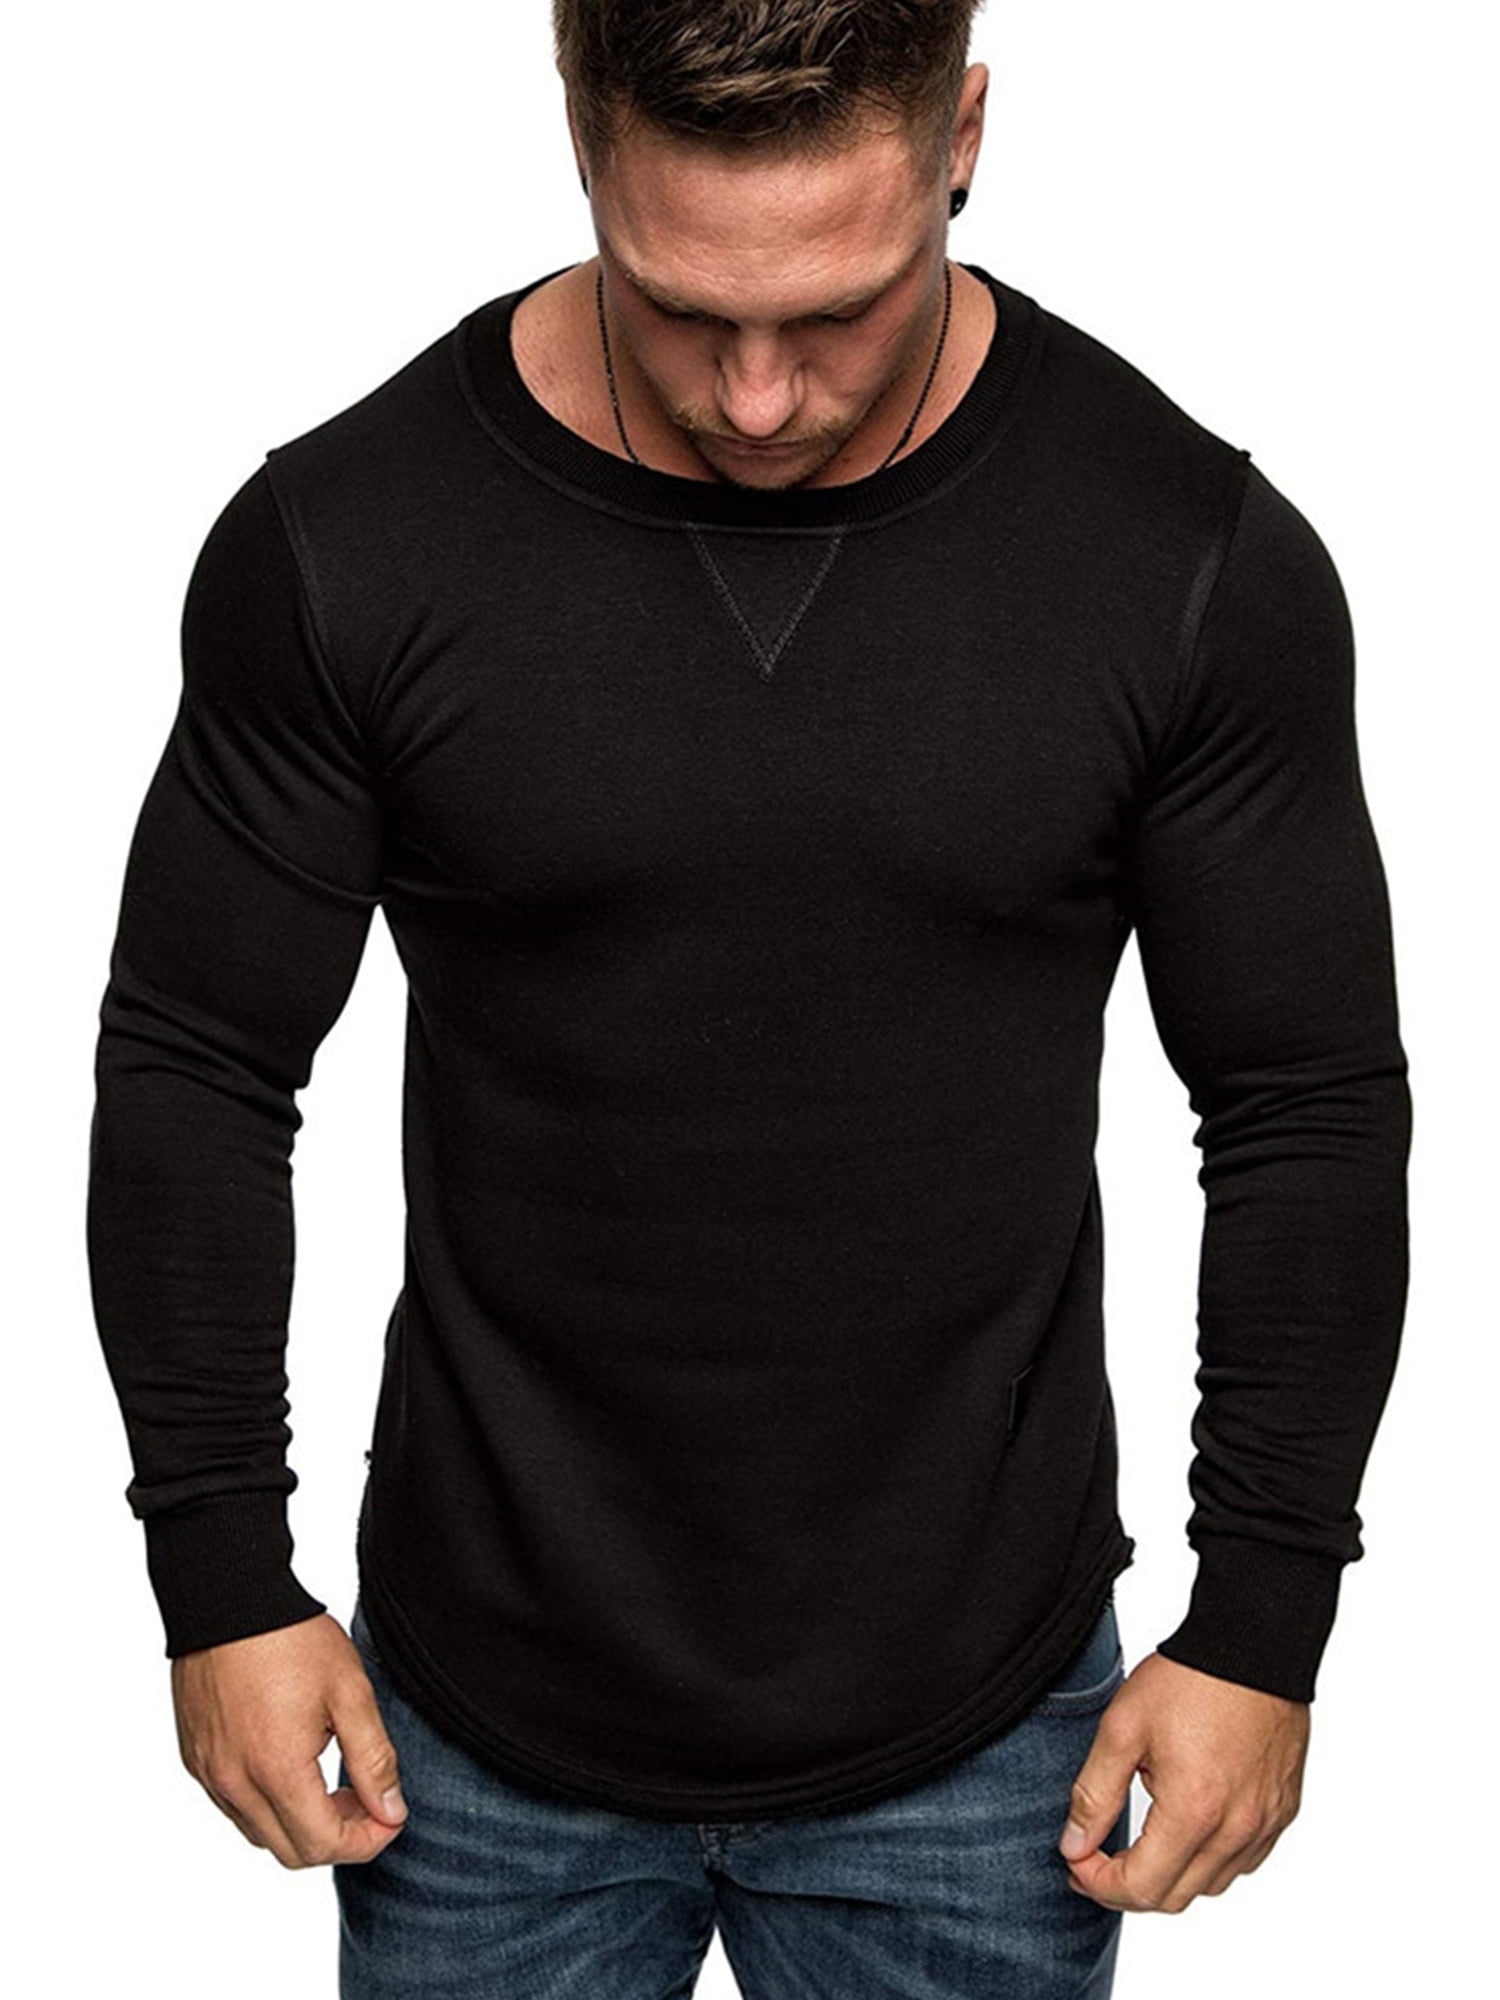 Men Shirt Long Sleeve Sports Tight Slimming Body Athletic Muscle Solid Color Tee Top